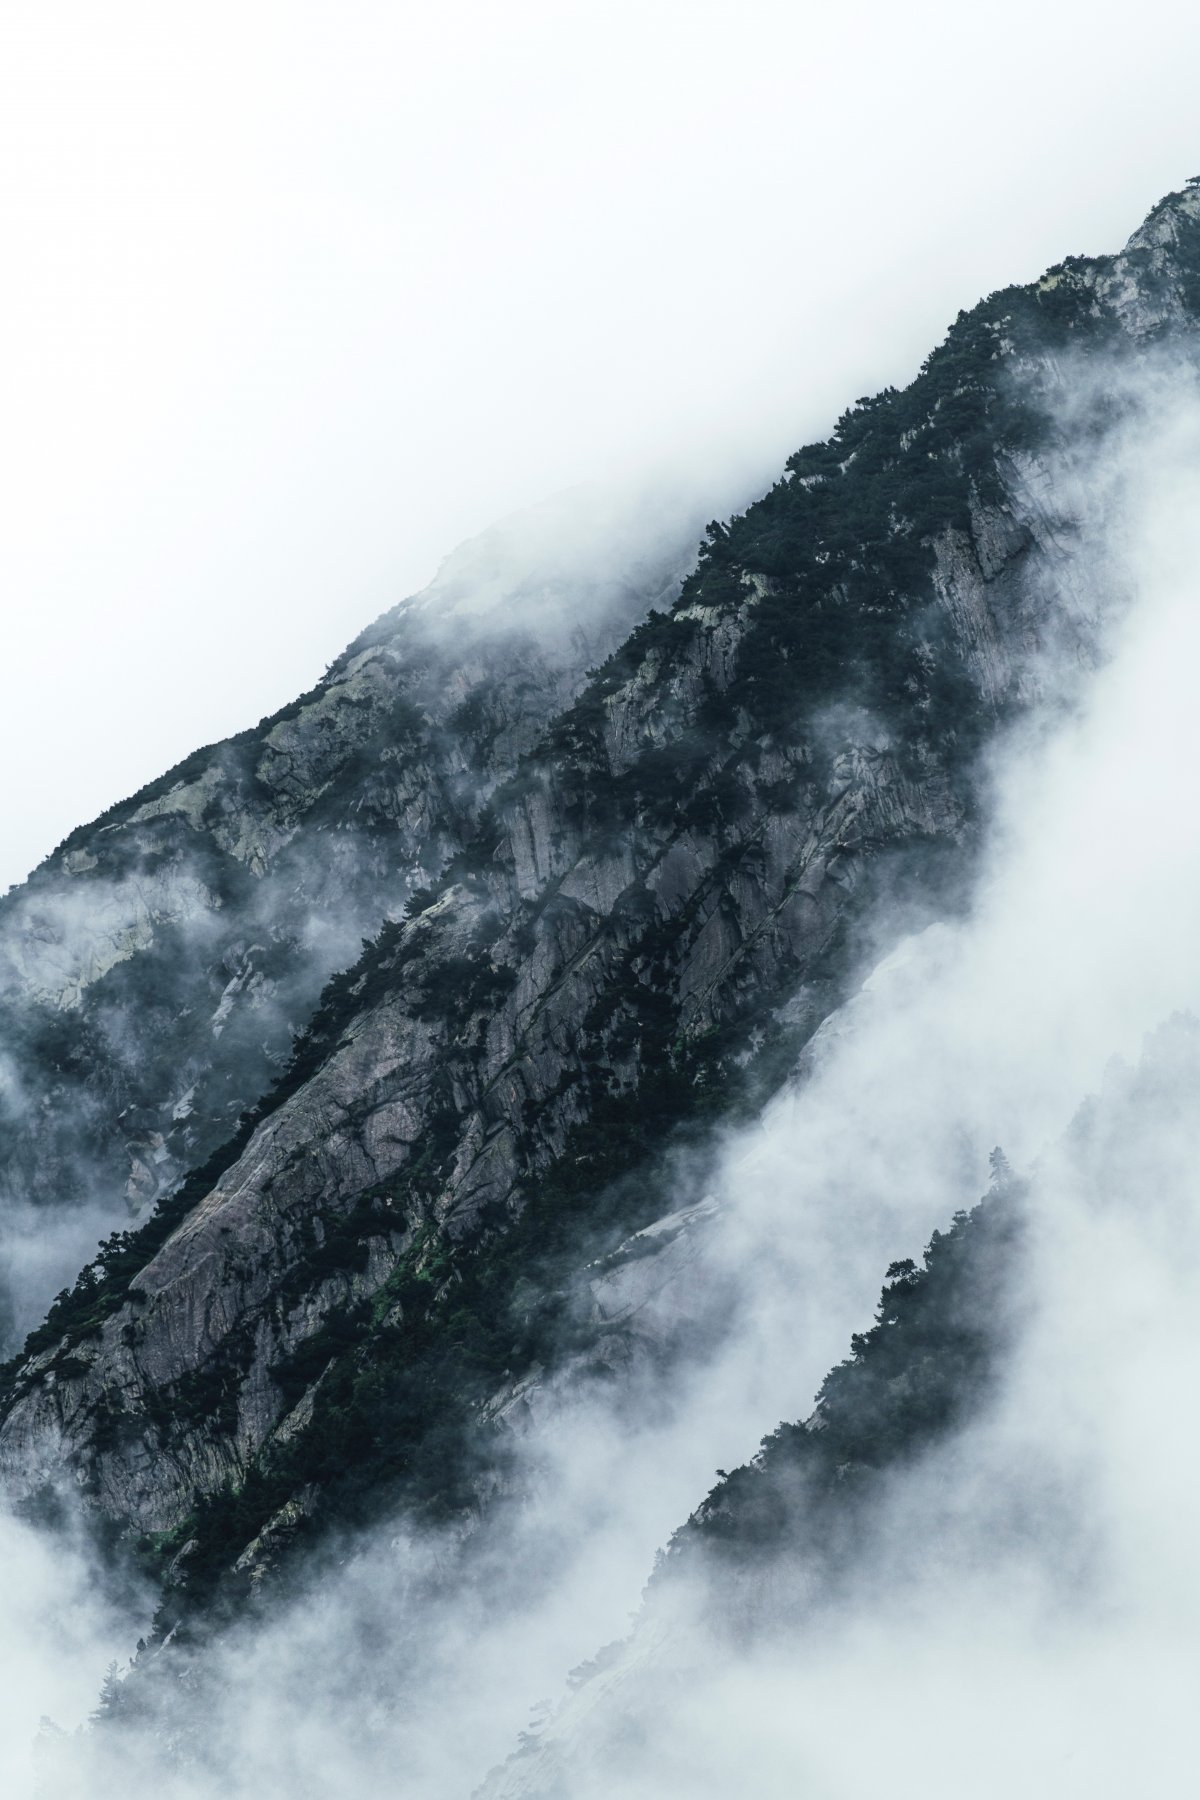 Dense fog filled mountain pictures